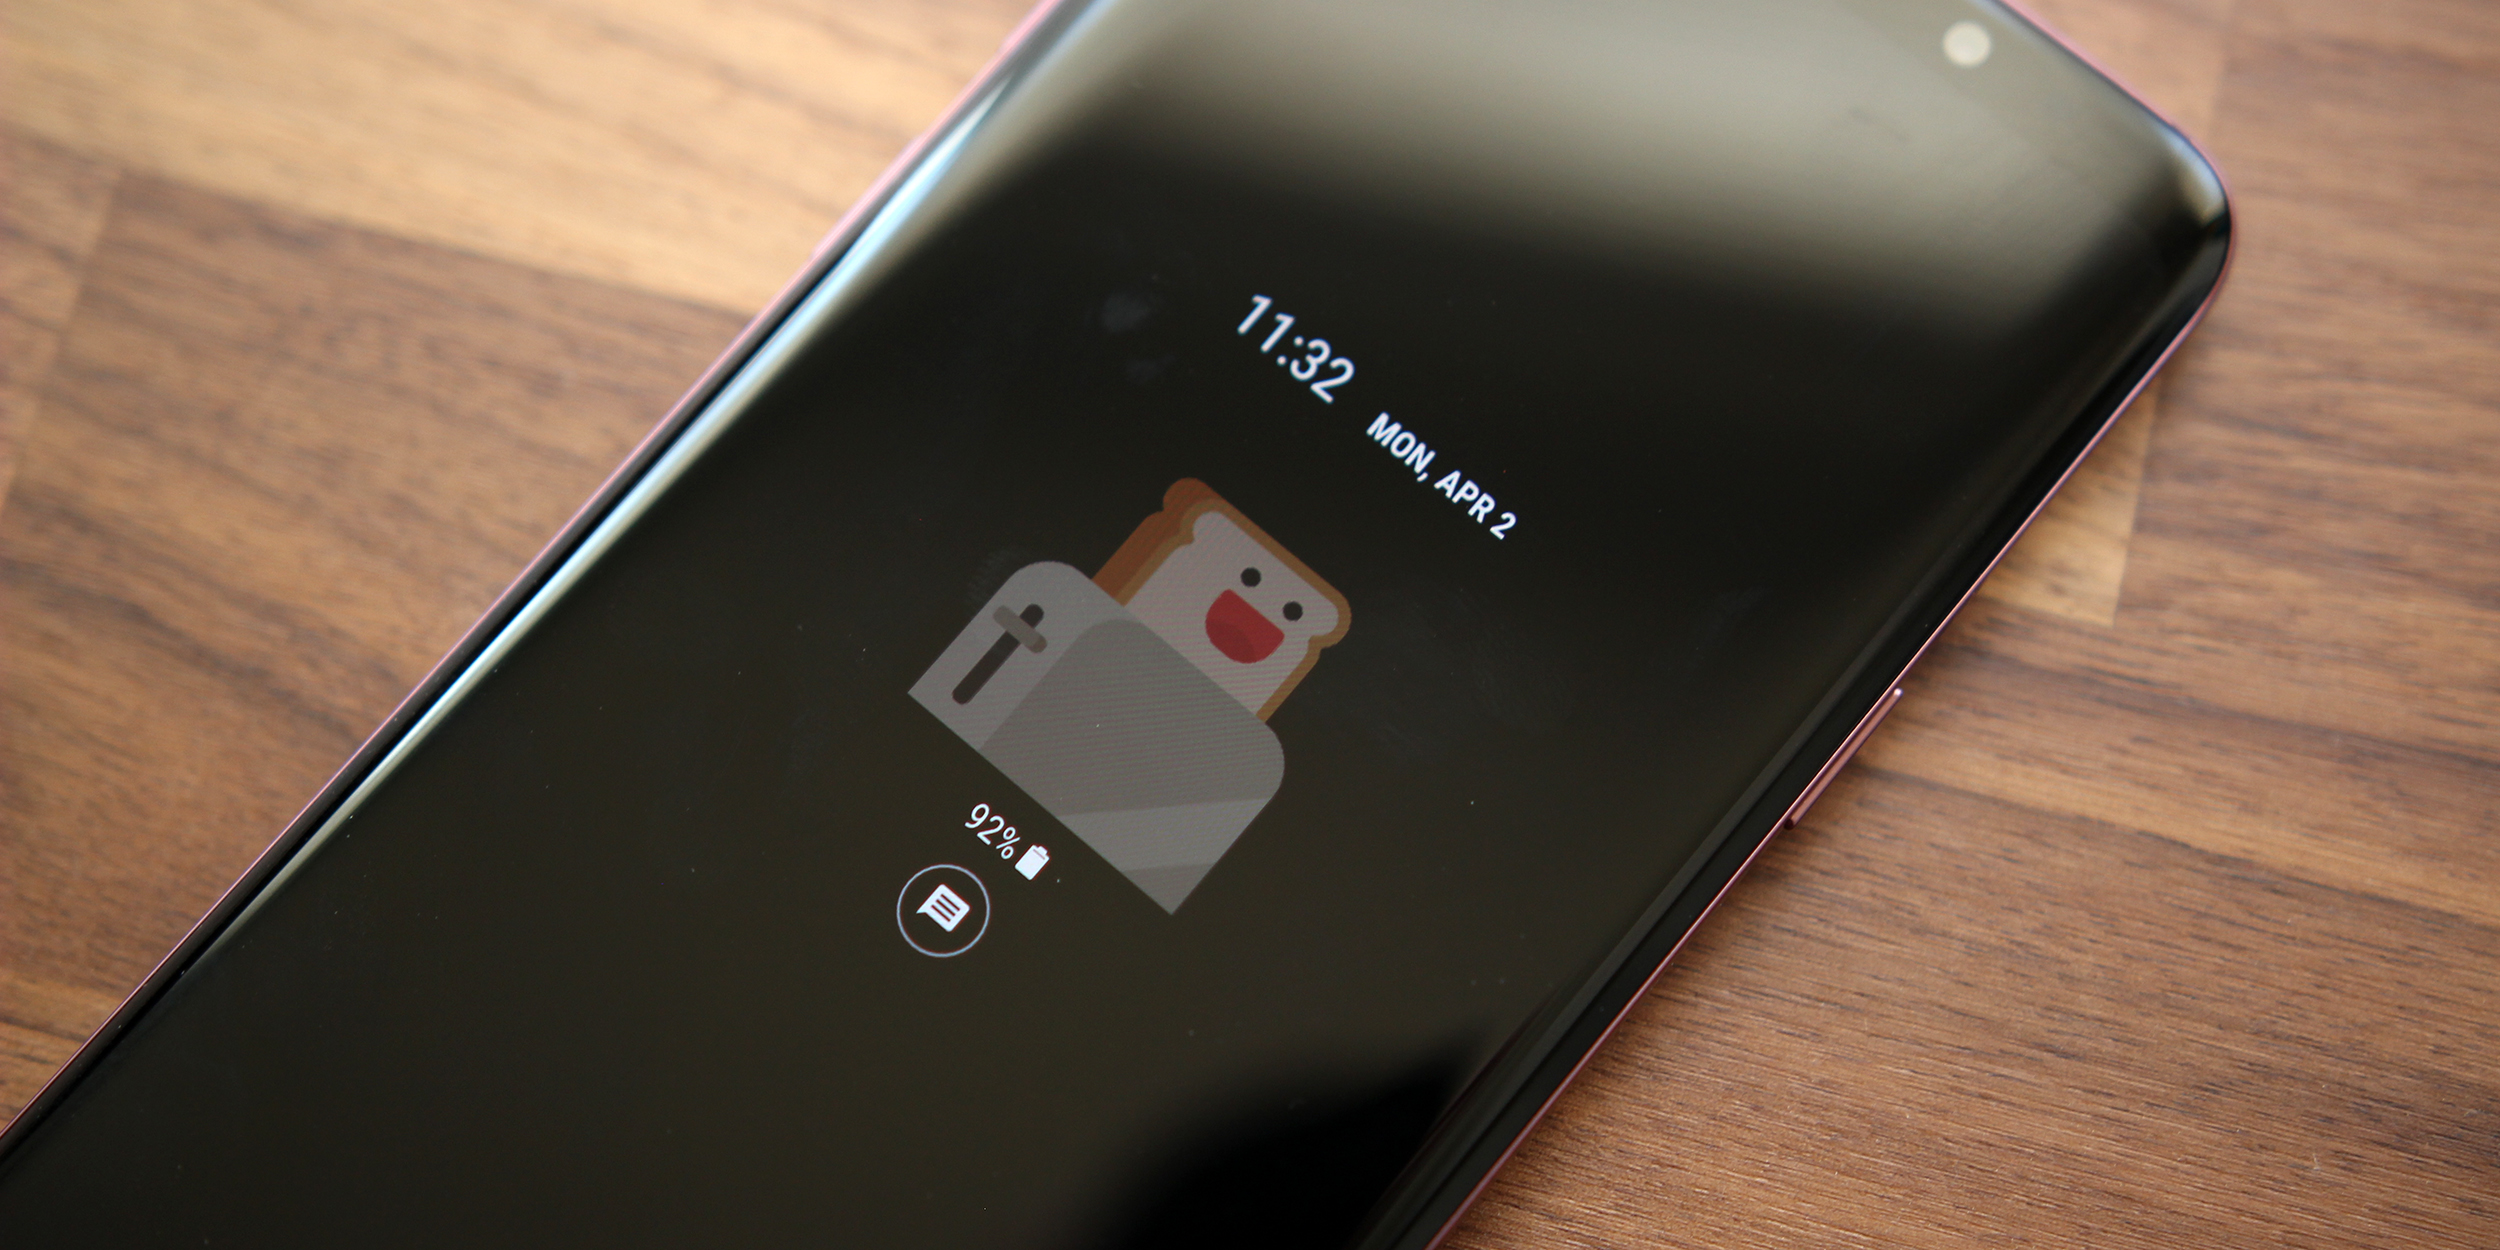 GIF-LOCK, Android App Full of Animated GIFs For Your Lock Screen